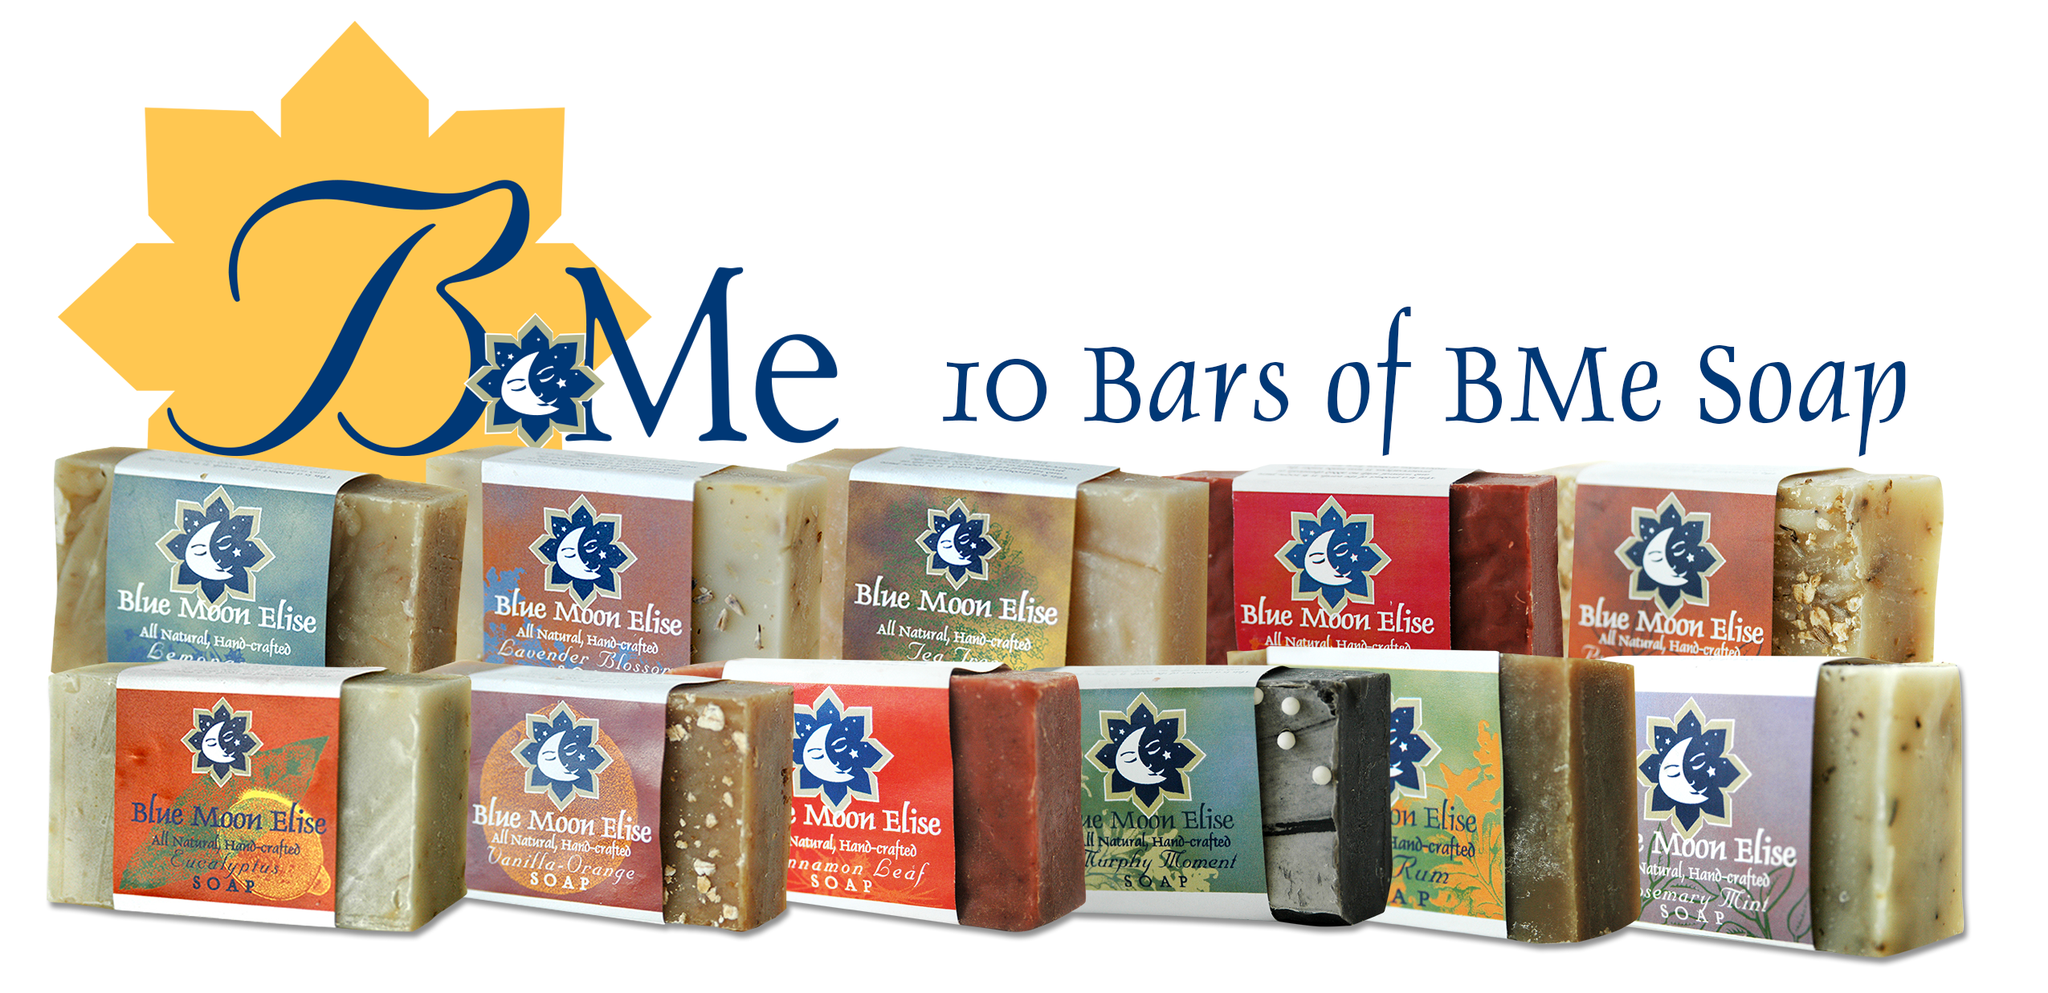 10 Bars of BMe Soap- click here to find out which soaps (Promo)